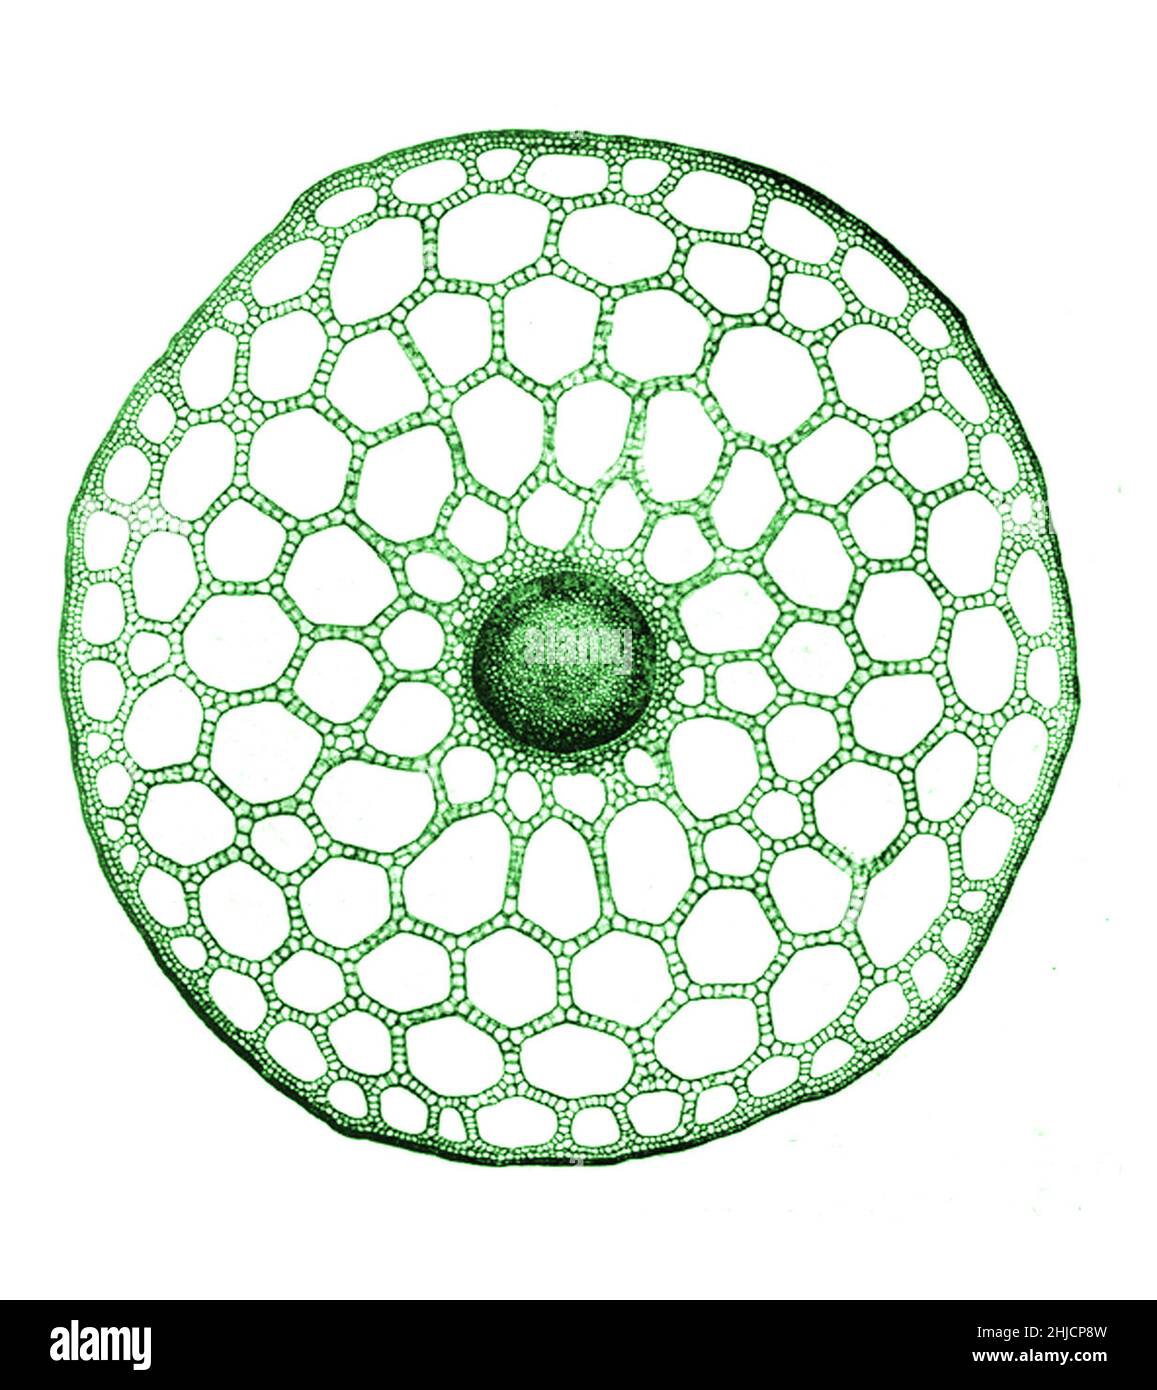 Stem of section of Mare's Tail (Hippuris vulgaris). Magnification: 14x. Hippuris vulgaris is a common aquatic plant of Eurasia and North America. Photomicrograph made by Arthur E Smith in the early 1900s, using a combined microscope and camera. In 1904, the Royal Society in London exhibited a series of Smith's photomicrographs to the public. They were later published in 1909 in a book called 'Nature Through Microscope & Camera.' They were the first examples of photomicroscopy many had ever seen. Stock Photo